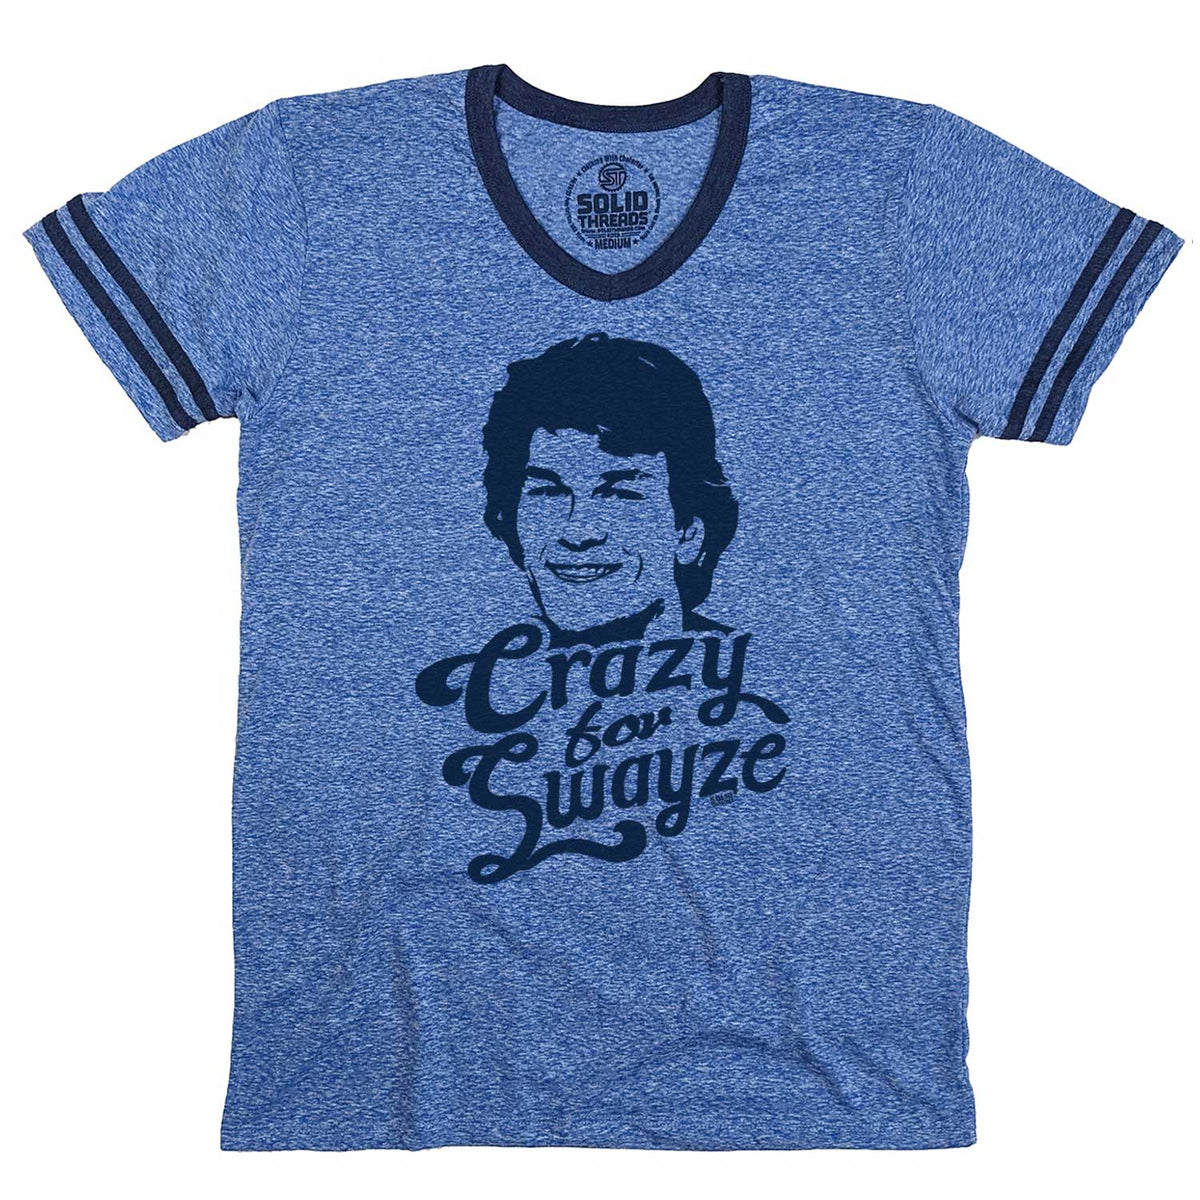 Men&#39;s Crazy for Swayze Vintage Graphic V-Neck Tee | Funny Patrick Swayze T-shirt | Solid Threads